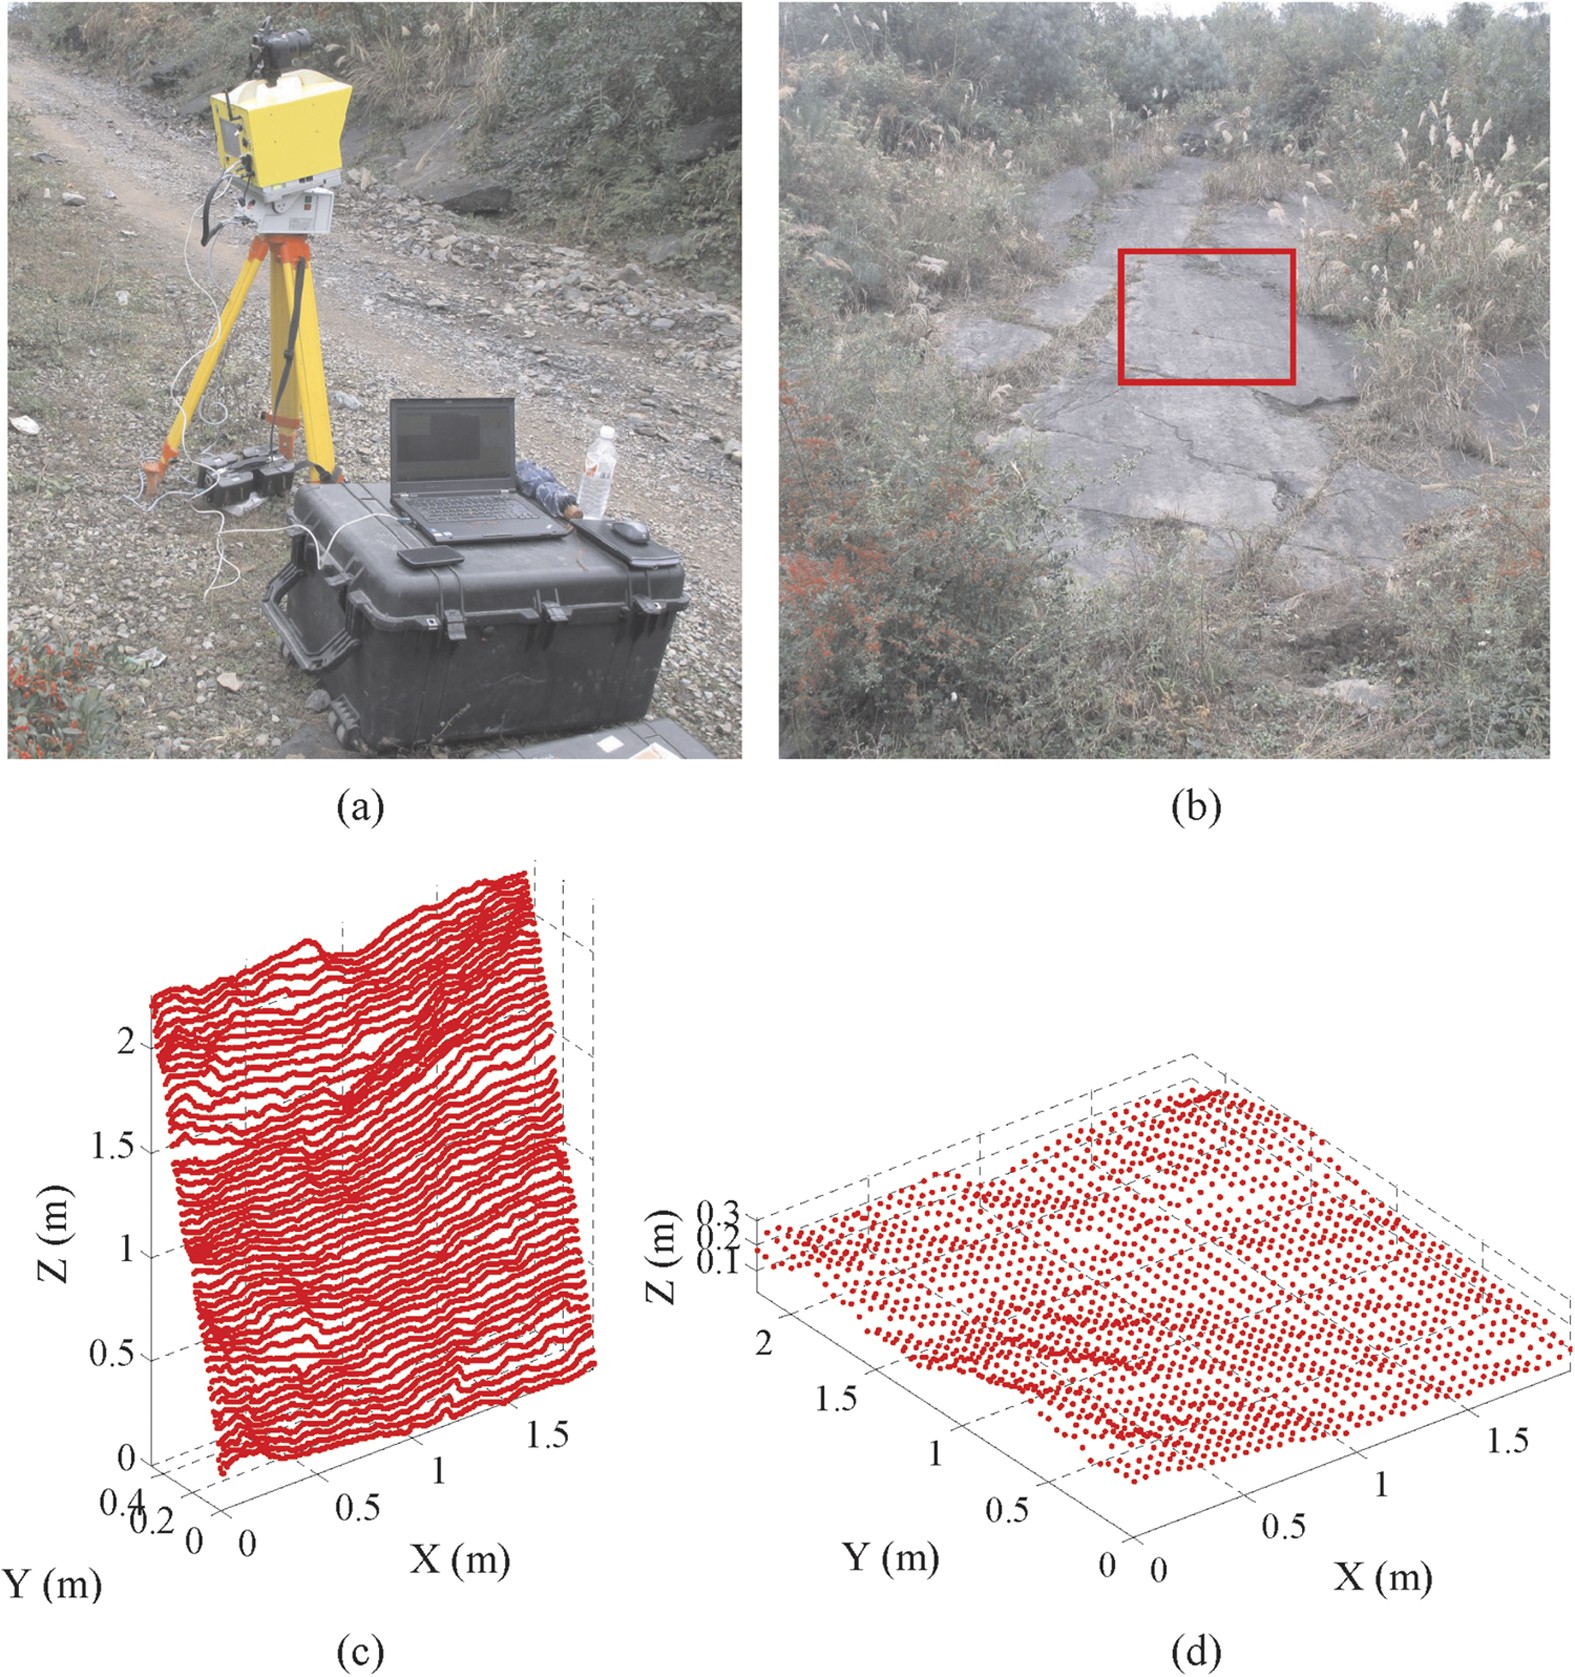 A Description for Rock Joint Roughness Based on Terrestrial Laser Scanner  and Image Analysis | Scientific Reports